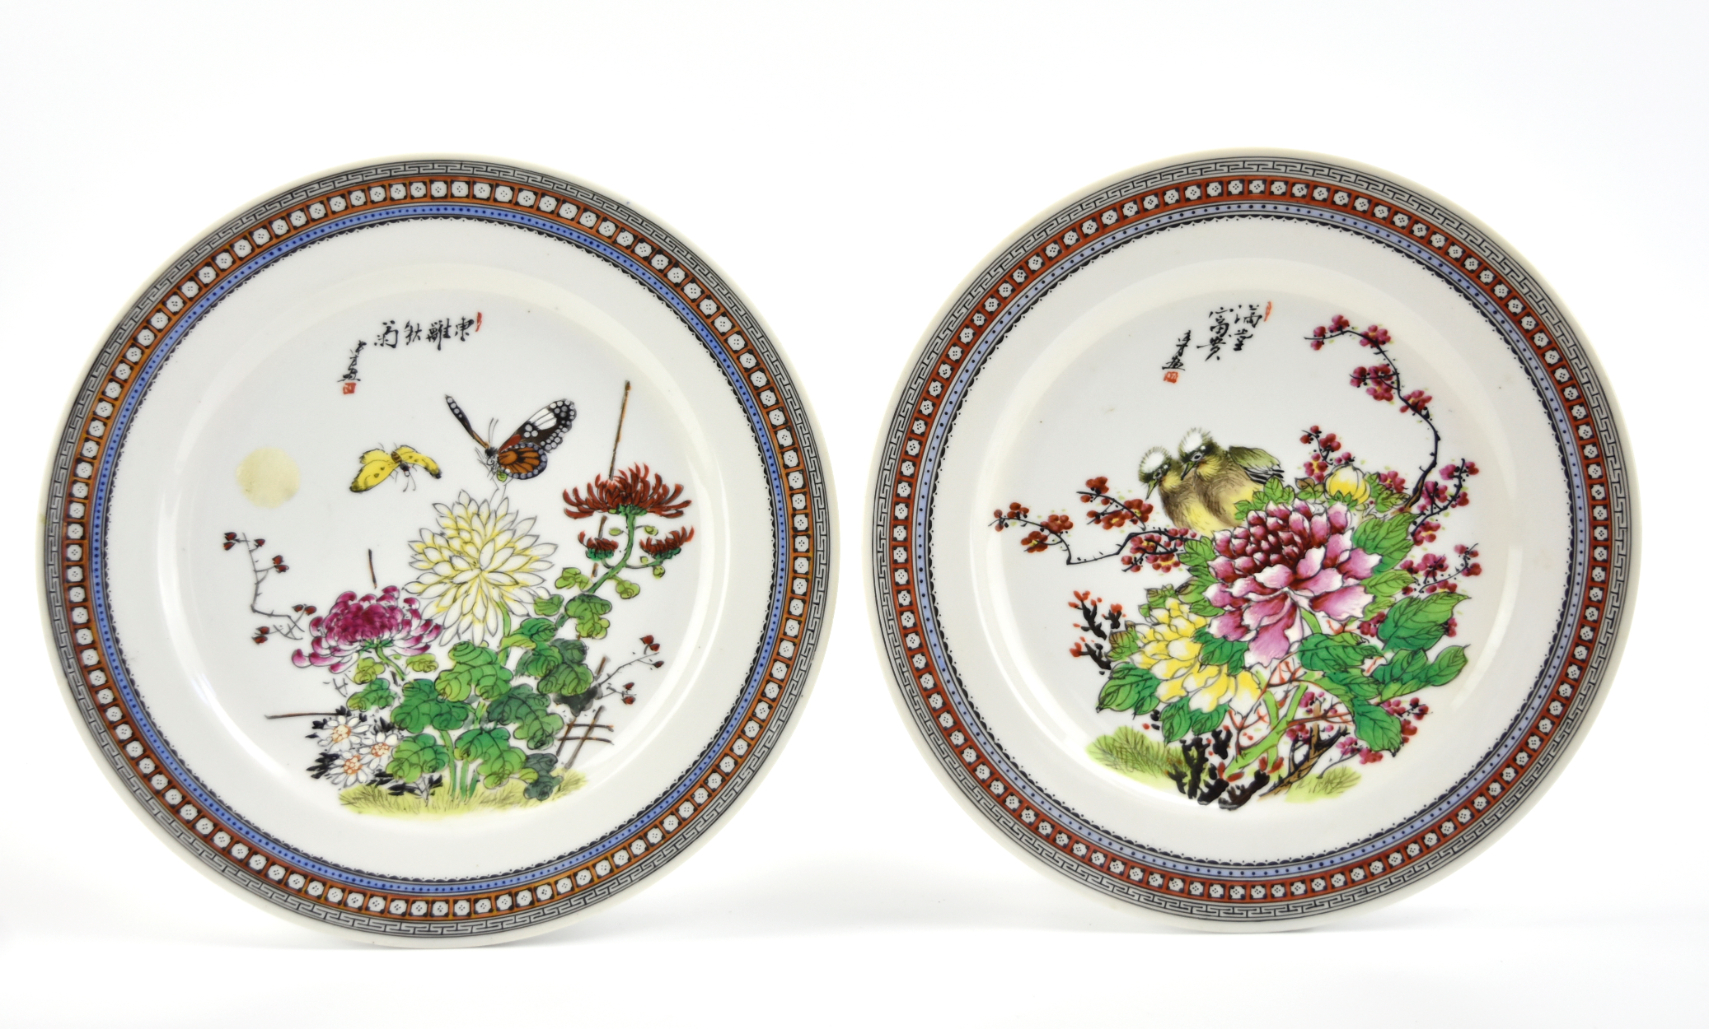 PAIR OF CHINESE FAMILLE ROSE PLATES  3397b7